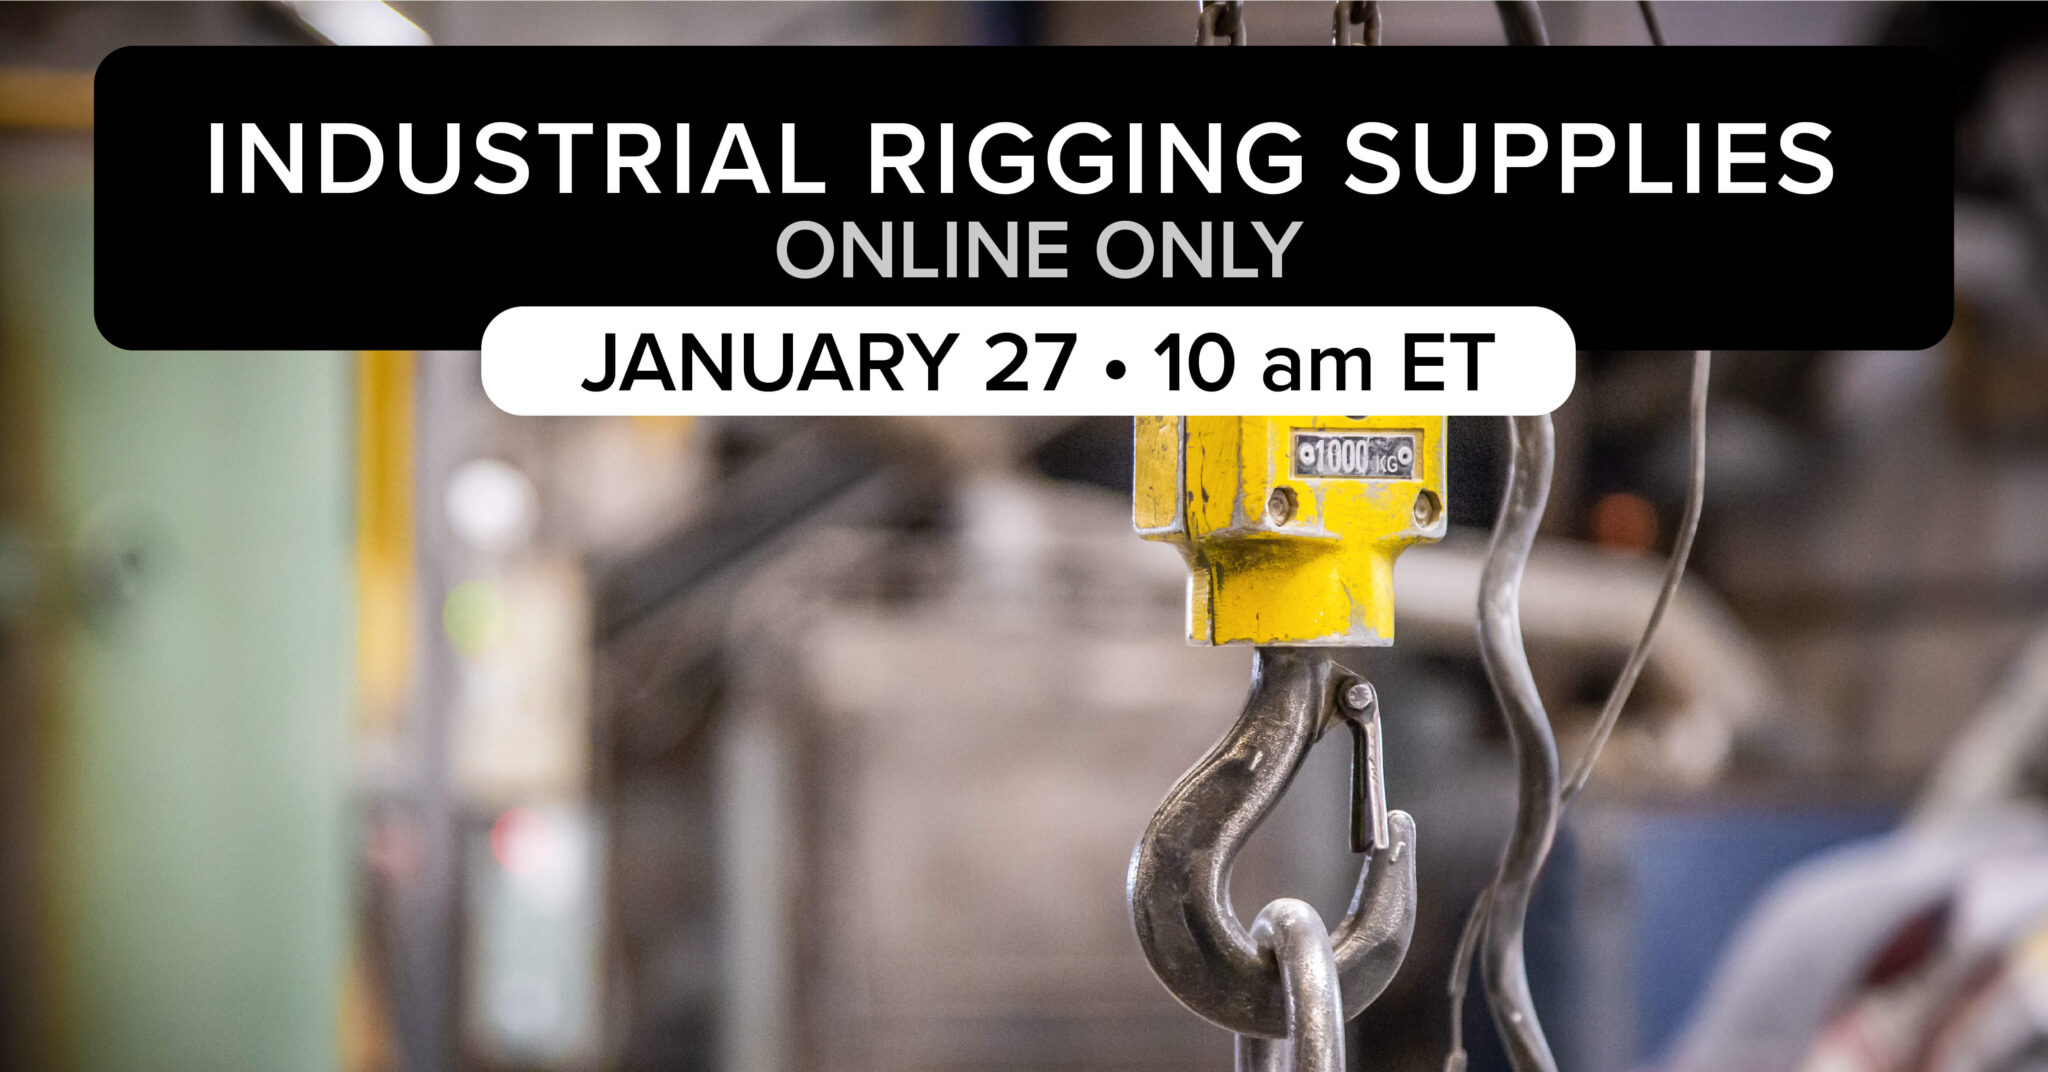 1/27 Industrial Rigging Supplies From North Carolina